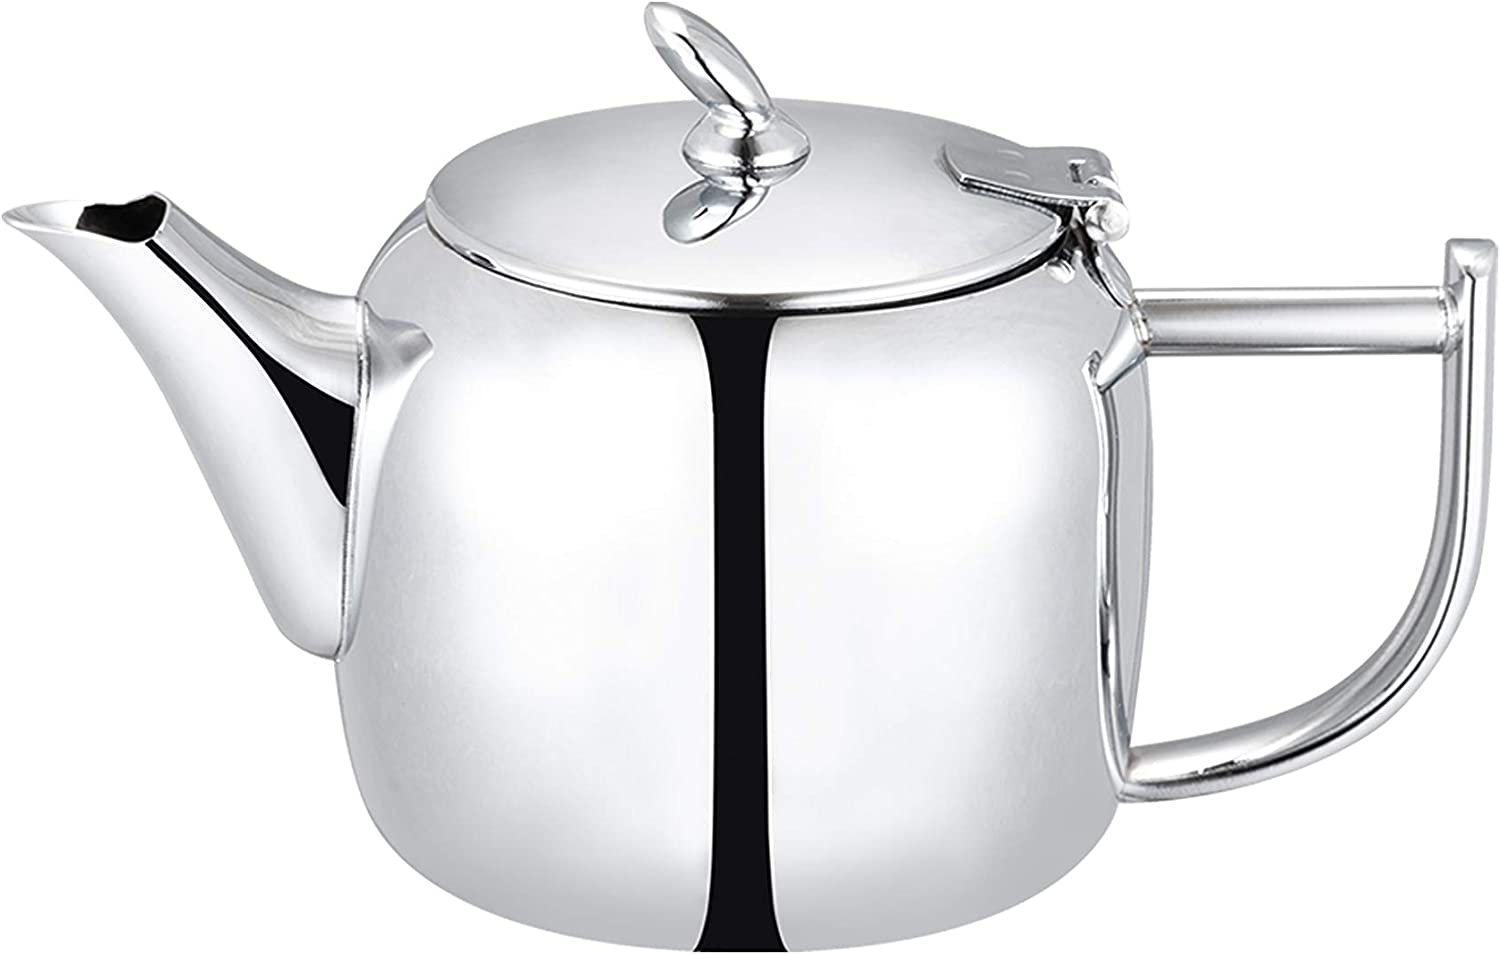 Cafe Ole Café Olé CHT-024 Chatsworth Teapot with Unique Lid Made of High Quality 18/10 Stainless Steel - High Polish 24oz Drip Free Casting Stainless Steel 24oz